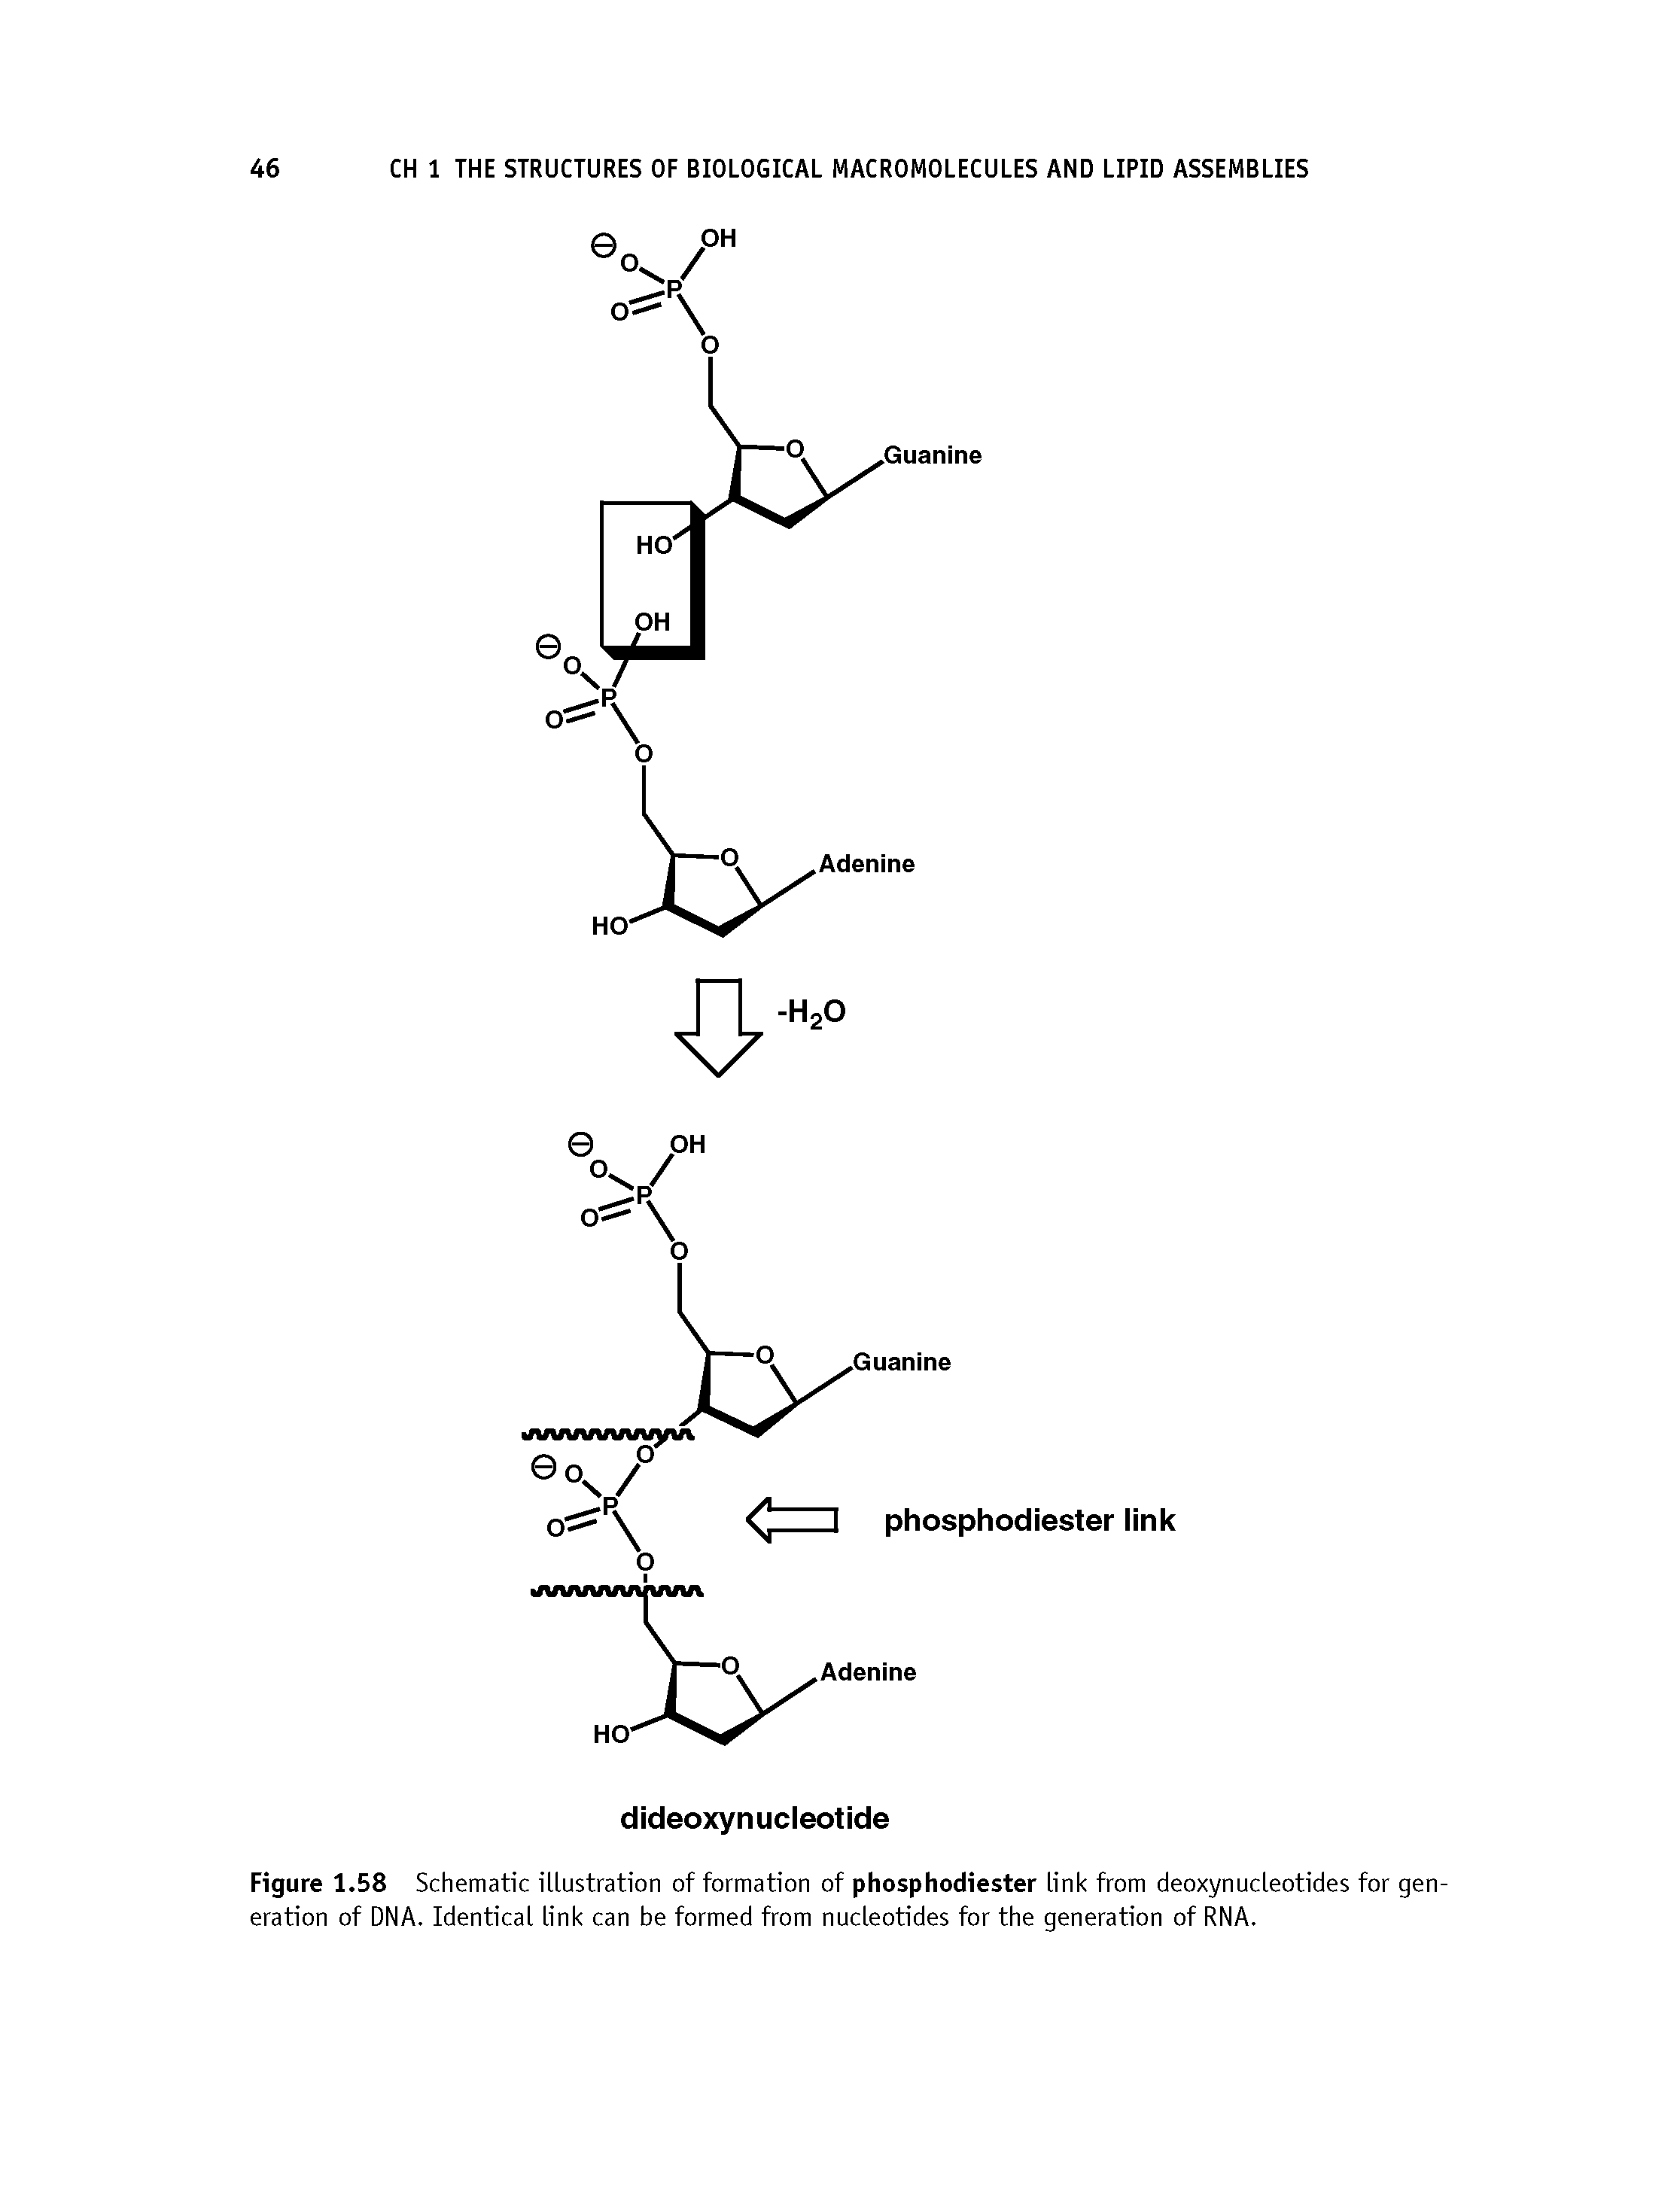 Figure 1.58 Schematic illustration of formation of phosphodiester link from deoxynucleotides for generation of DNA. Identical link can be formed from nucleotides for the generation of RNA.